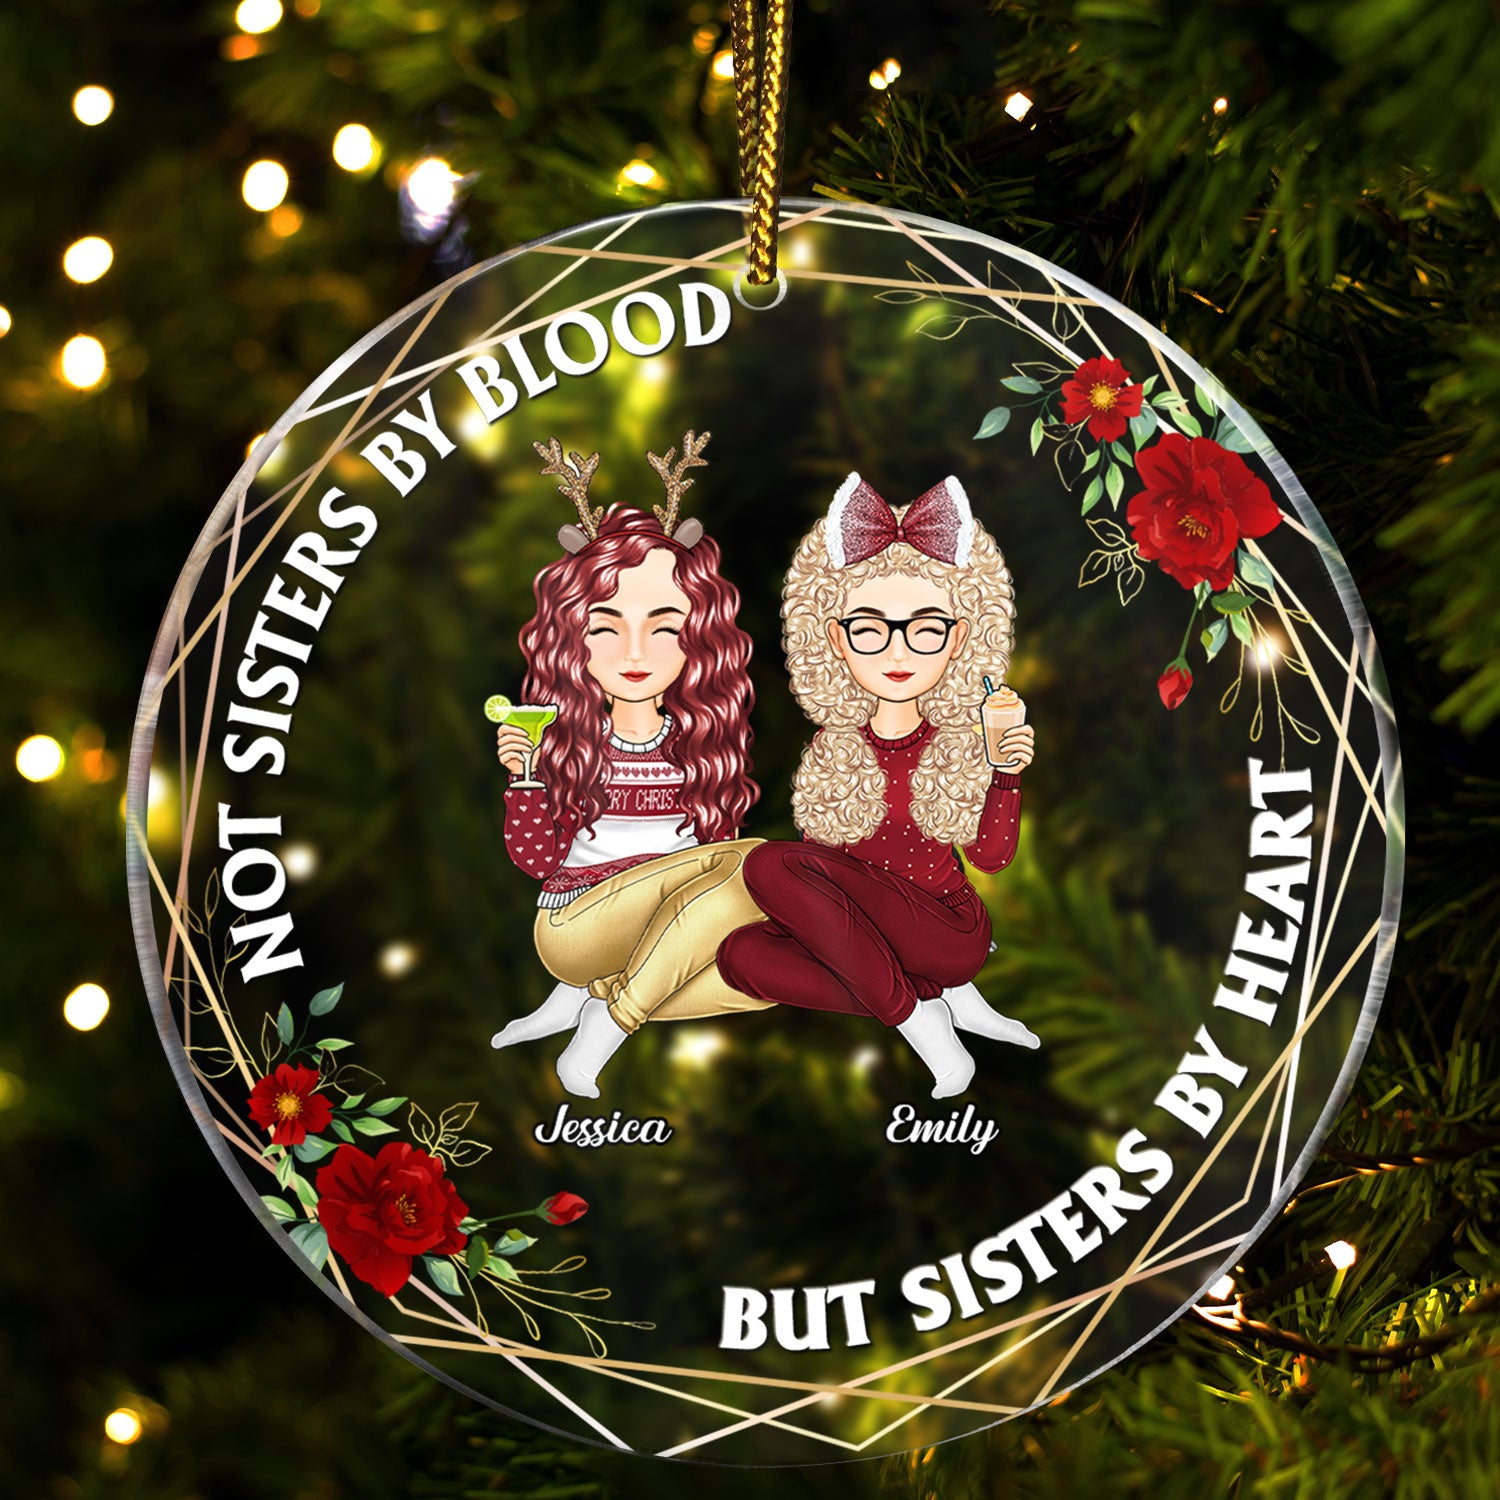 Not Sisters By Blood - Christmas Gift For Besties - Personalized Circle Acrylic Ornament